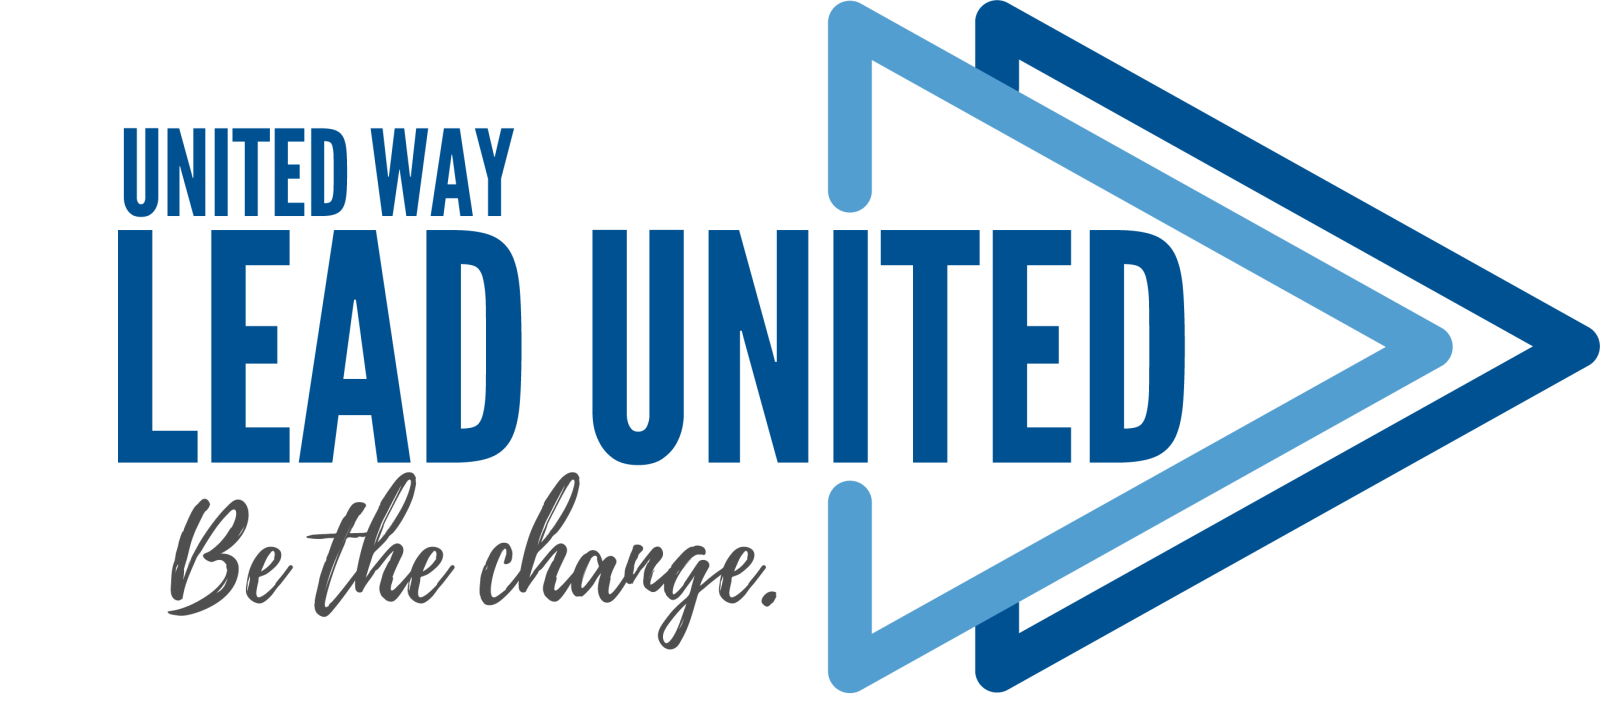 Lead United Logo With 